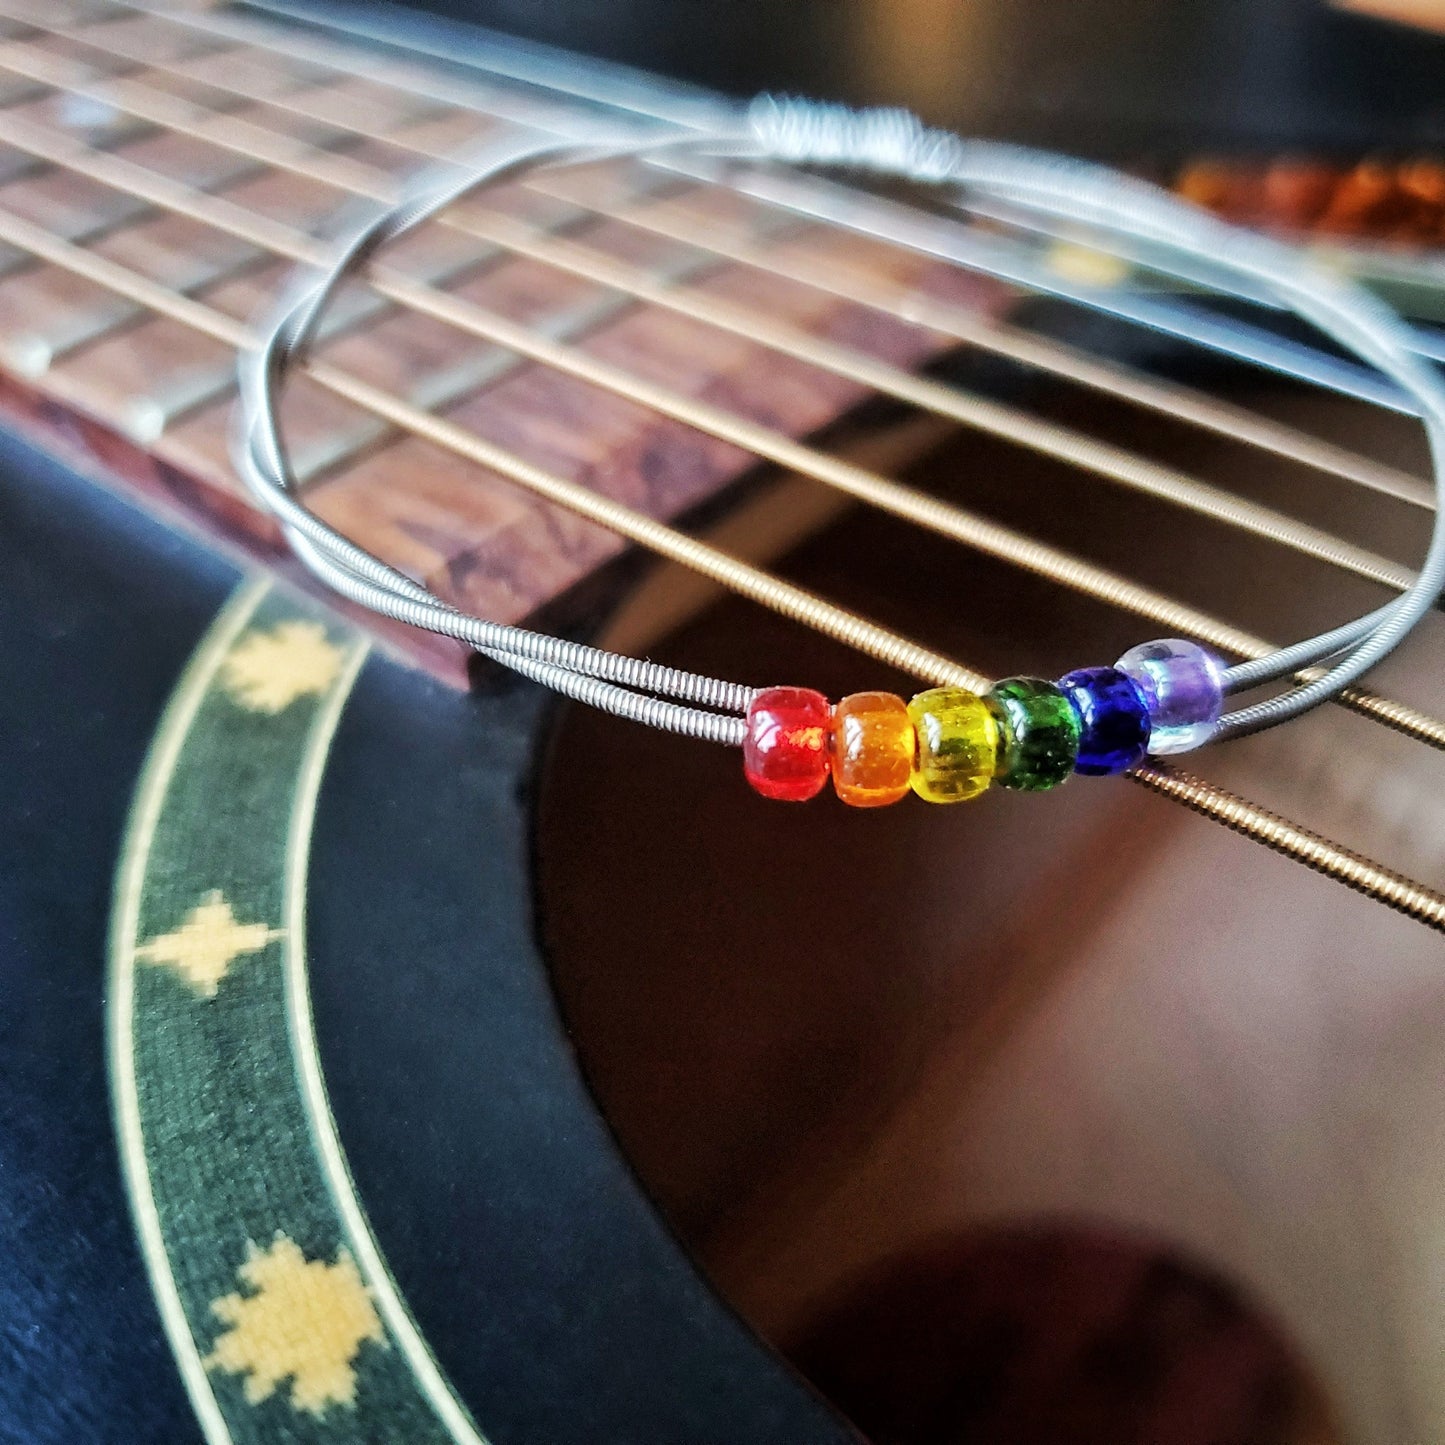 bangle style bracelet made from an upcycled guitar string - 6 glass beads represent the colours of the LGBTQ flag (red, orange, yellow, green, blue and purple) - sitting on the strings of a black guitar